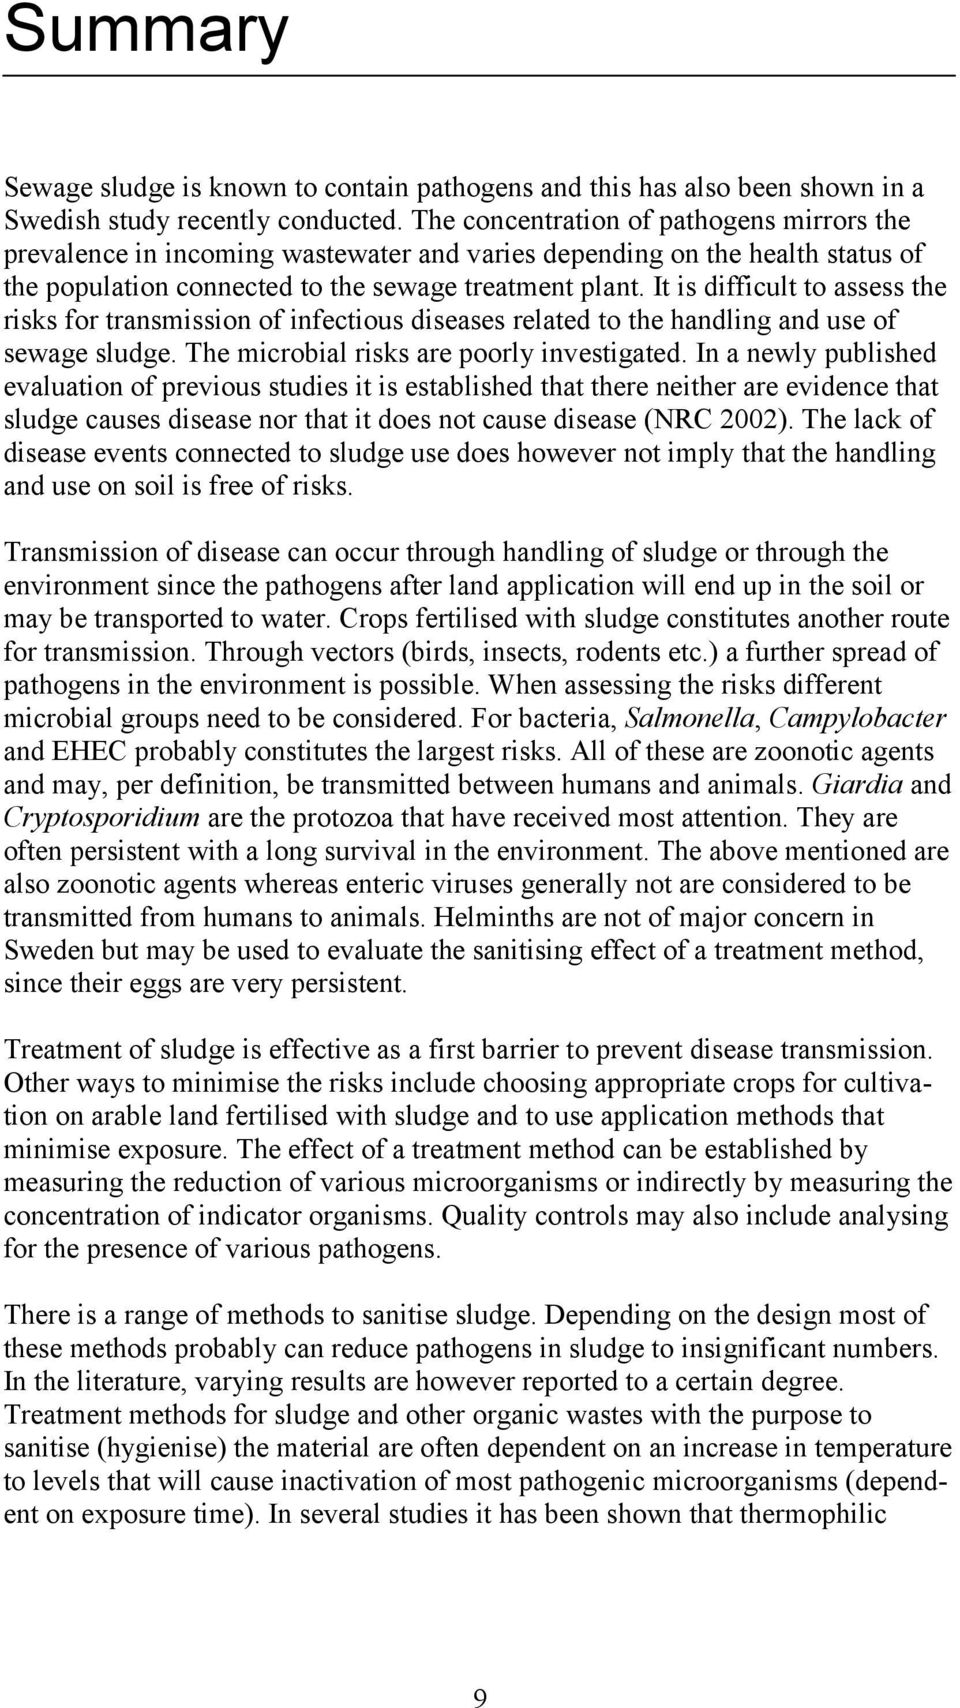 It is difficult to assess the risks for transmission of infectious diseases related to the handling and use of sewage sludge. The microbial risks are poorly investigated.